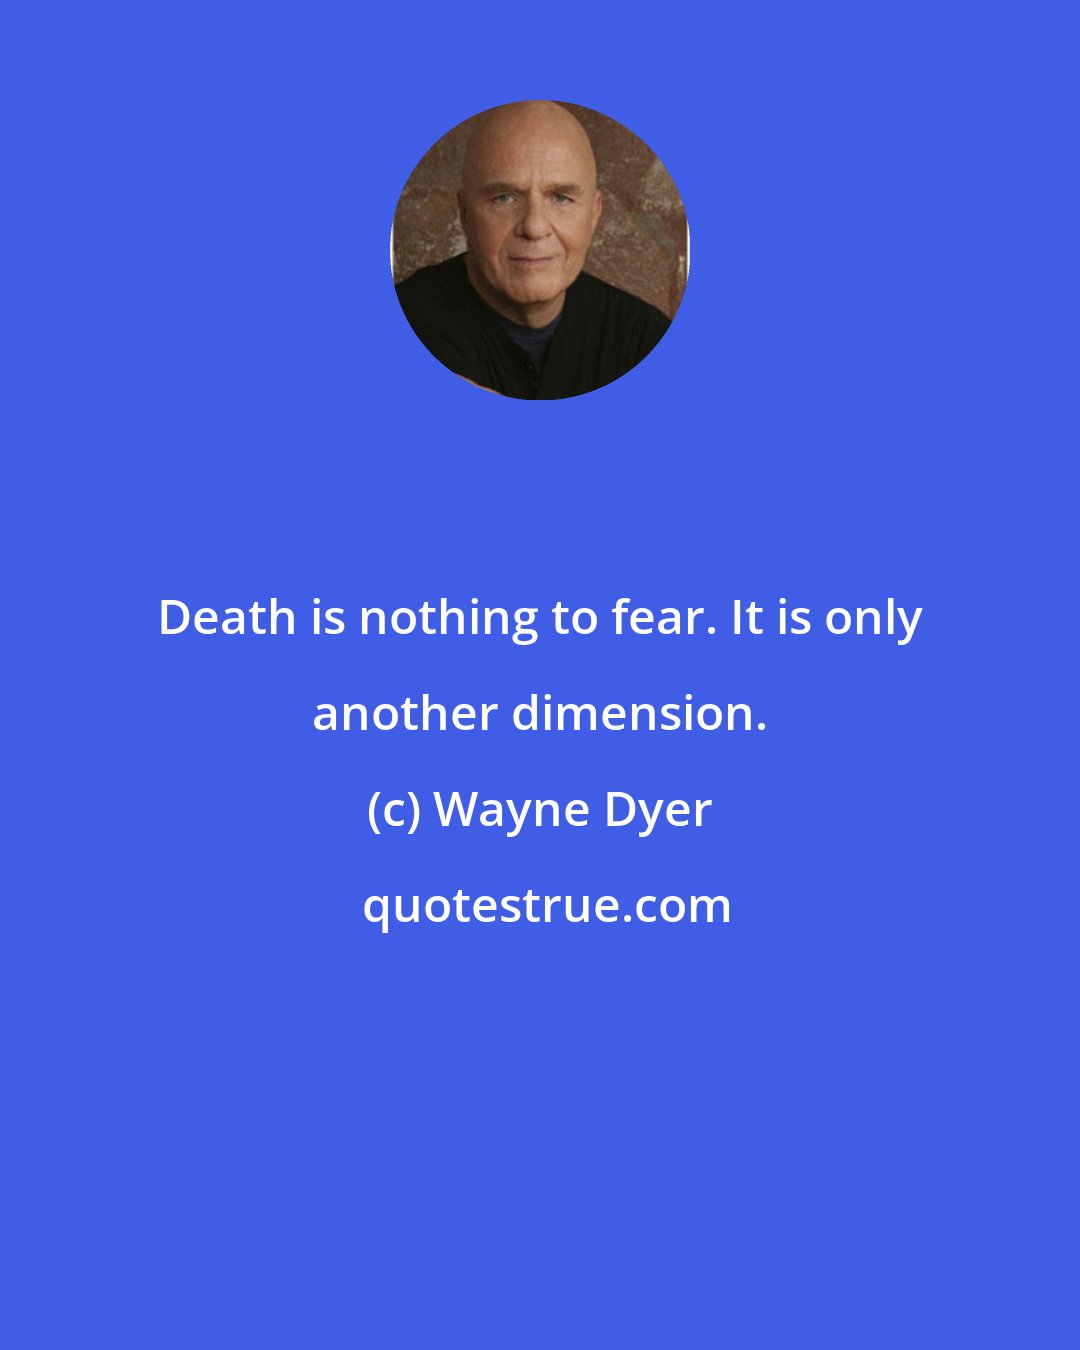 Wayne Dyer: Death is nothing to fear. It is only another dimension.